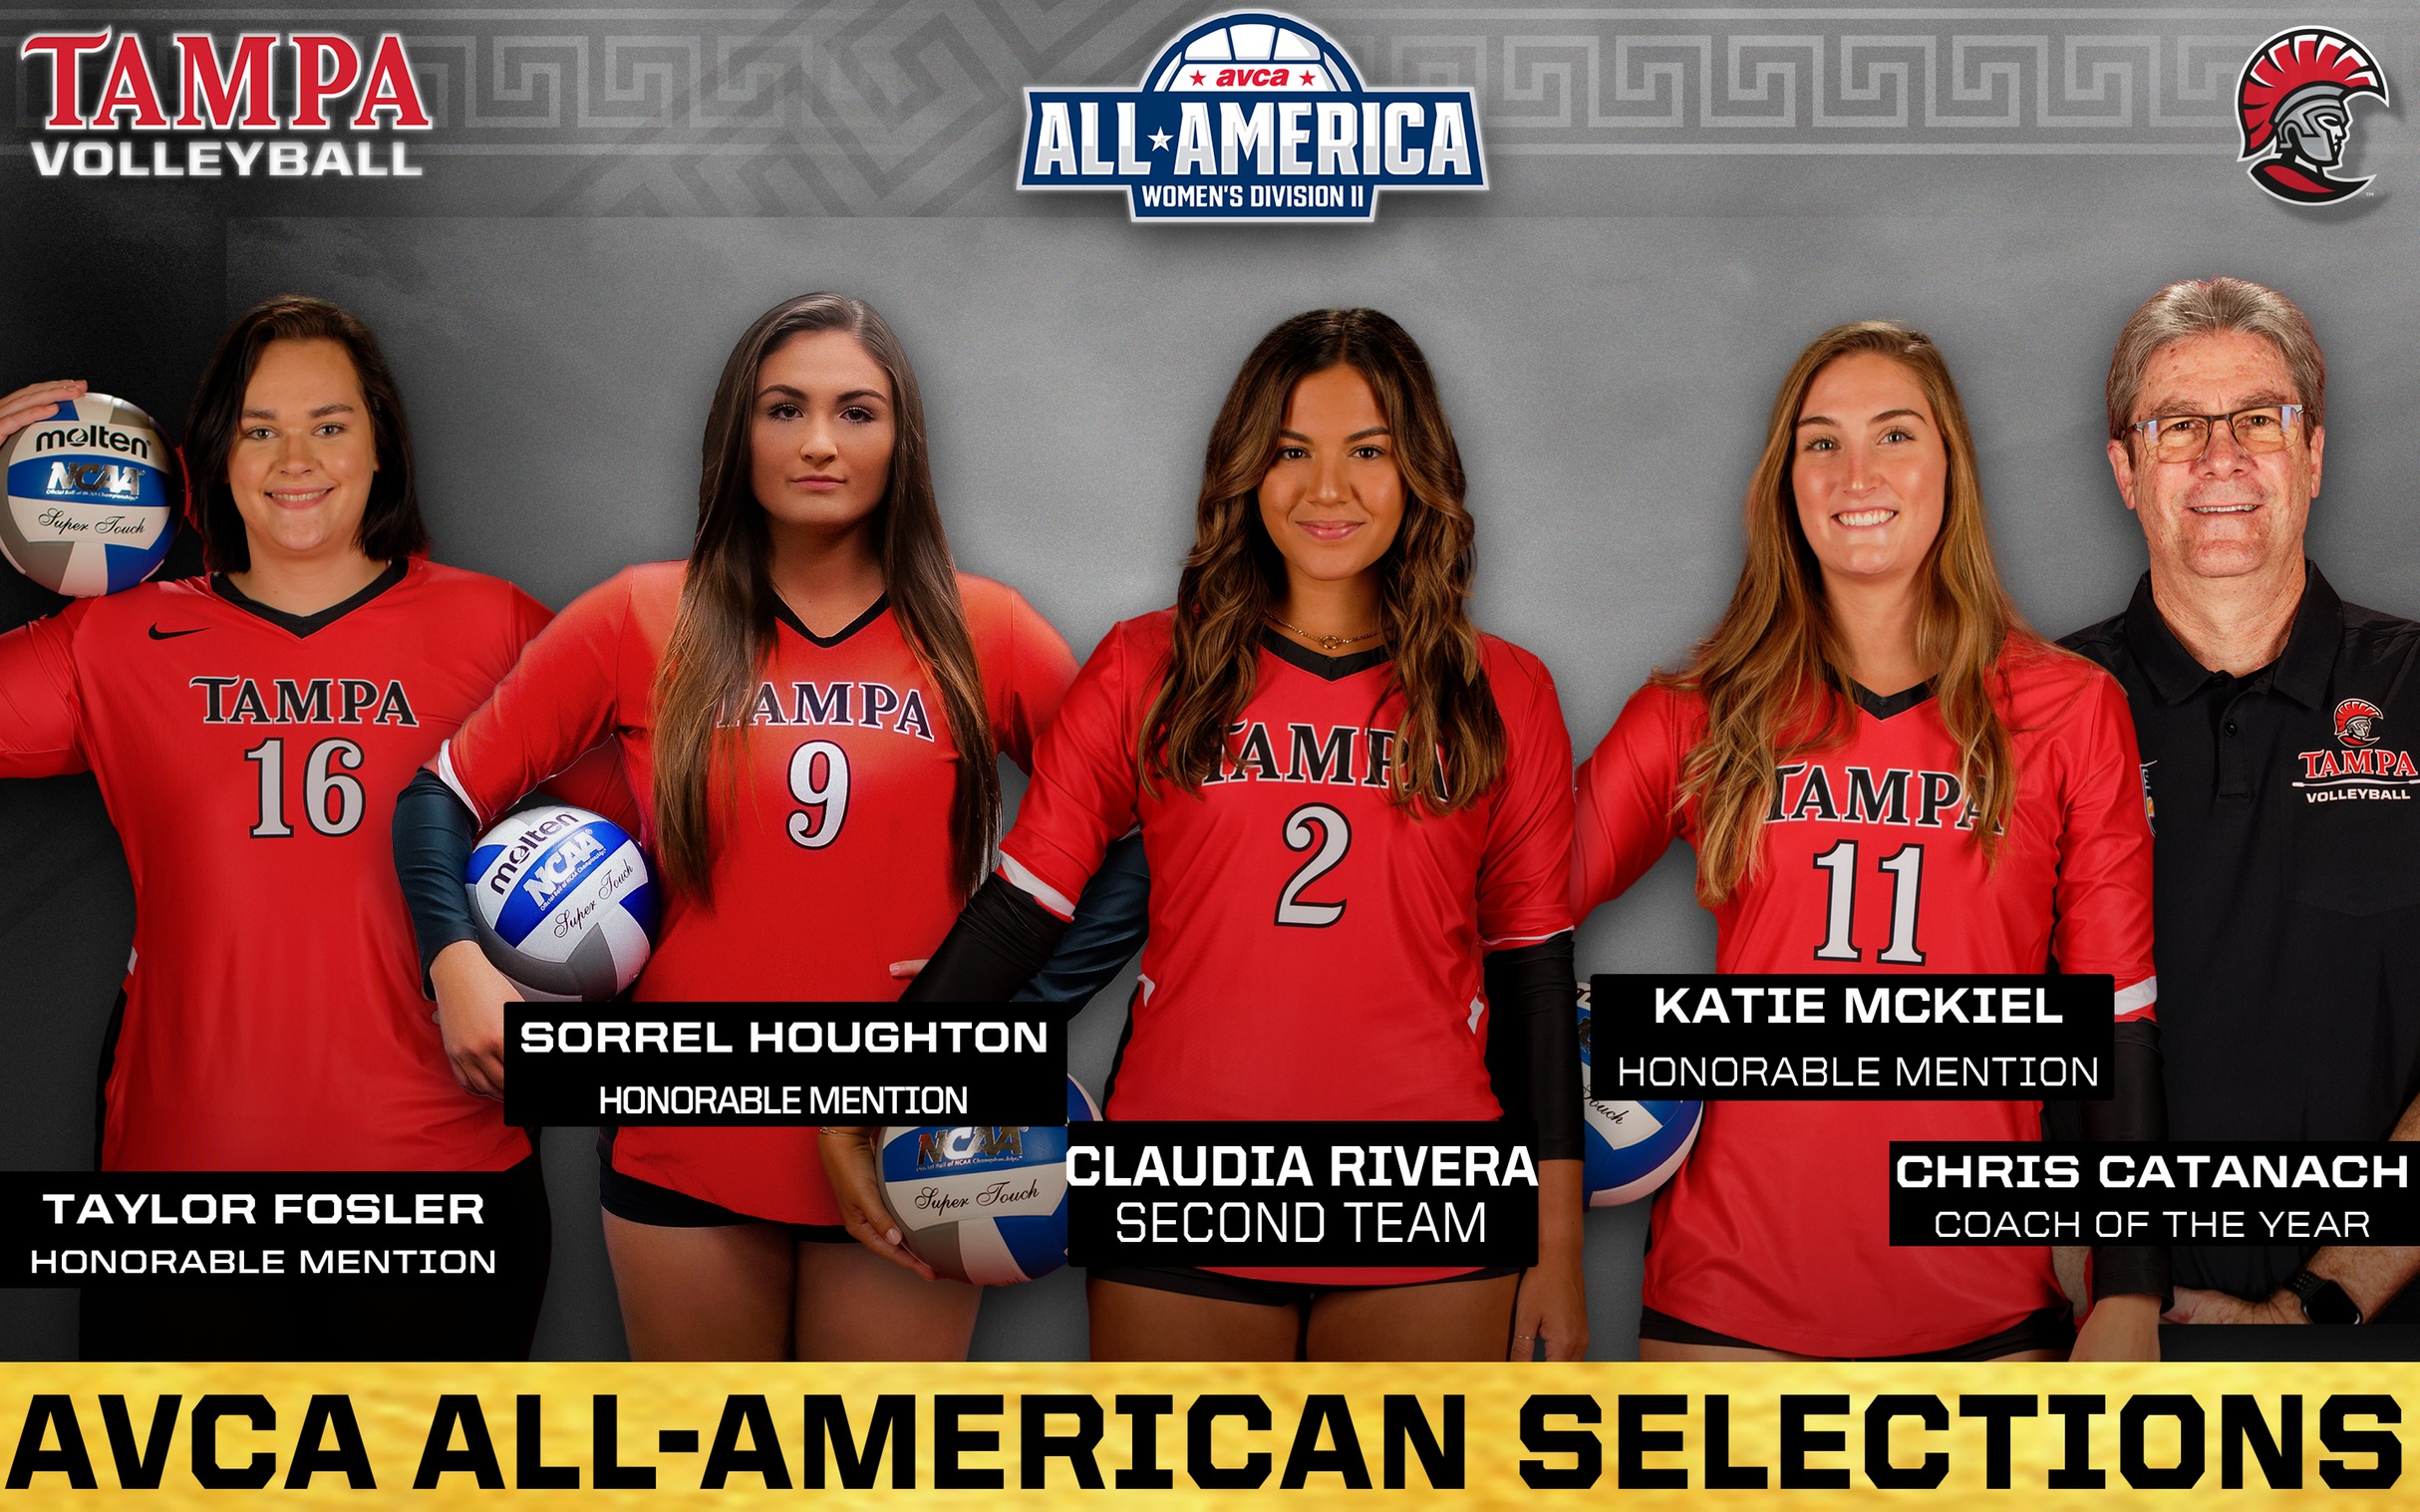 Tampa Volleyball Has Four AVCA All-American Selections and National Coach of the Year